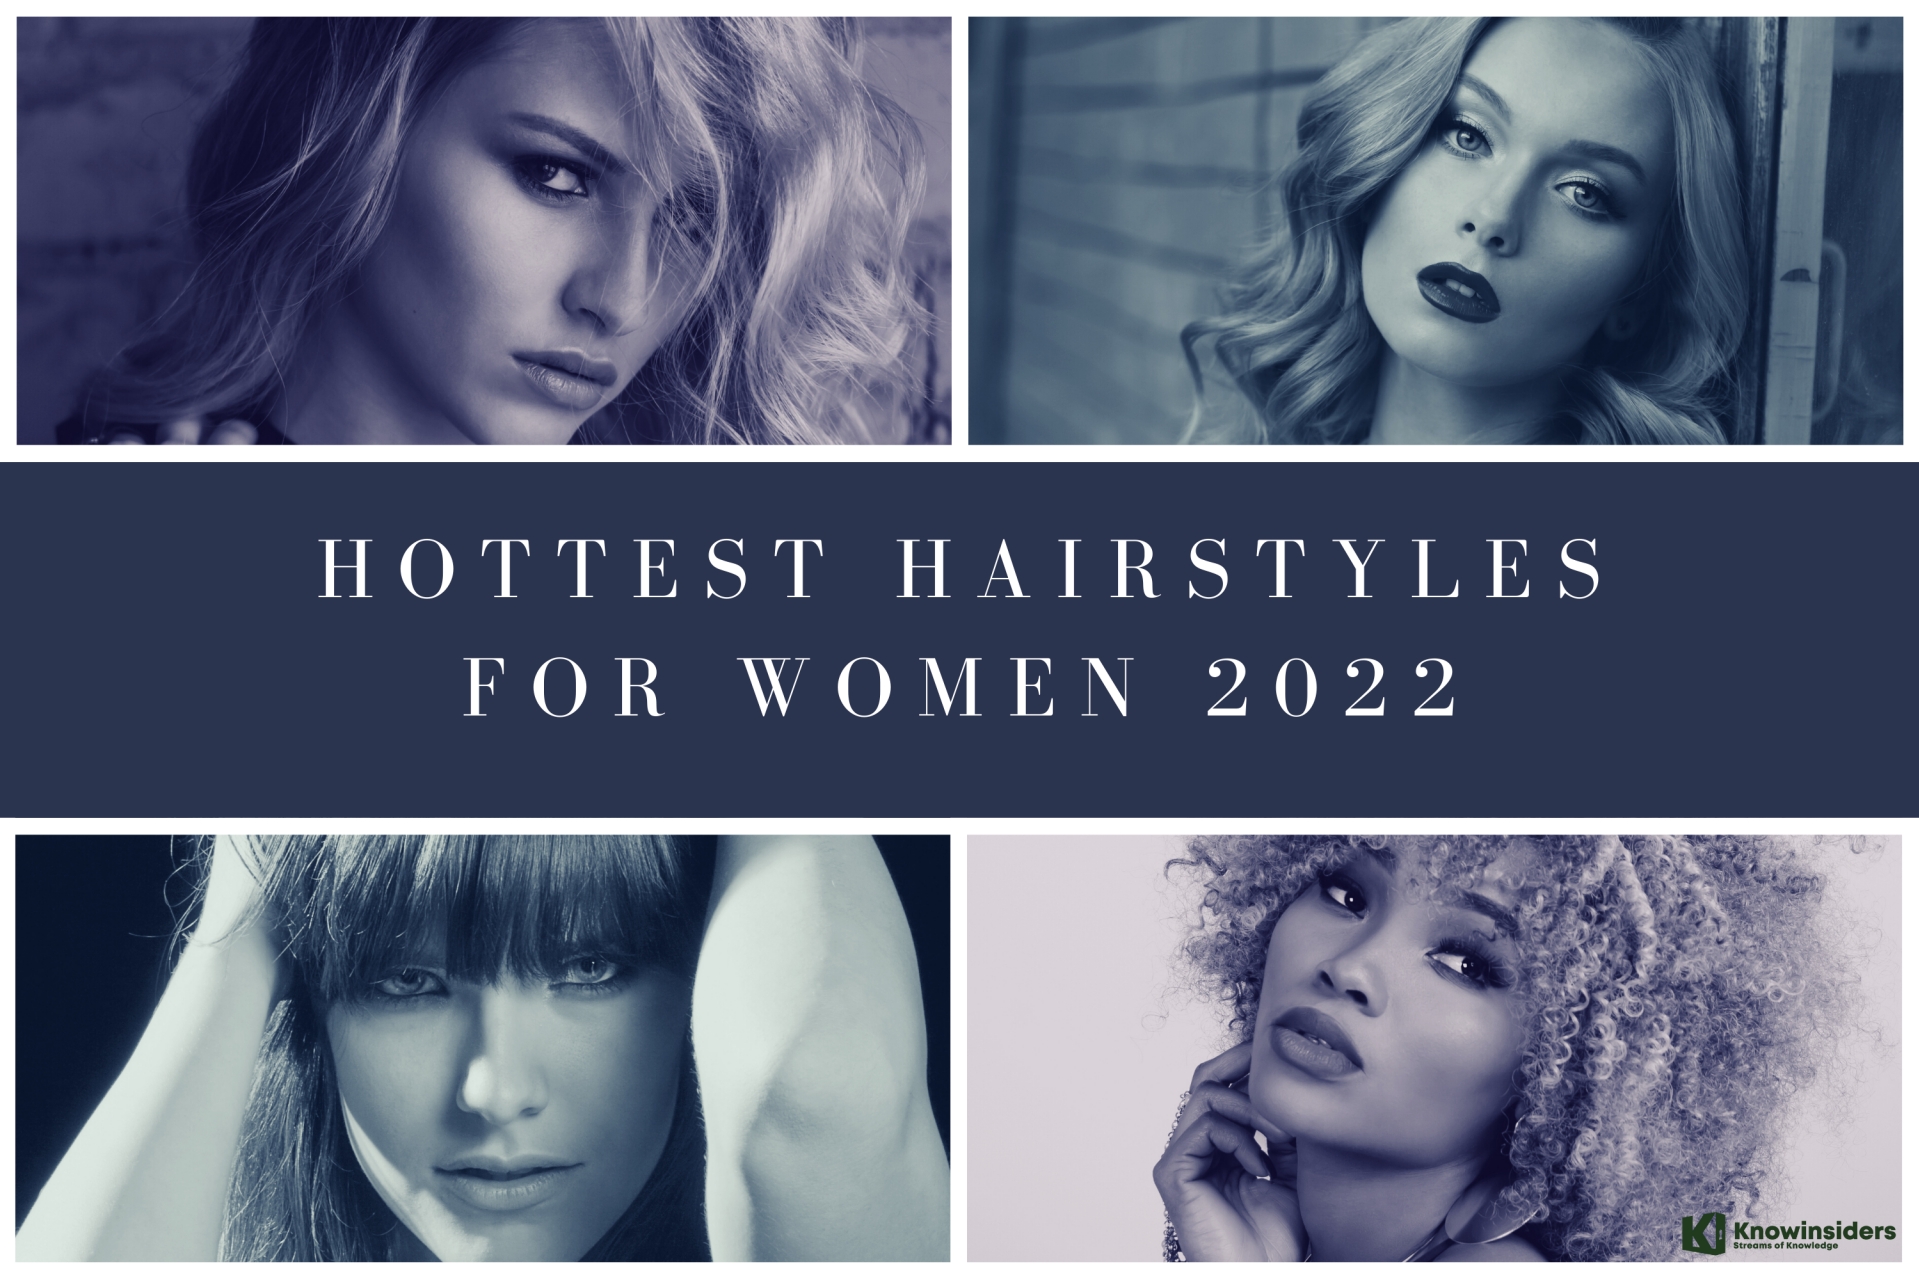 Top 10 Hottest Hairstyles For Women to Try